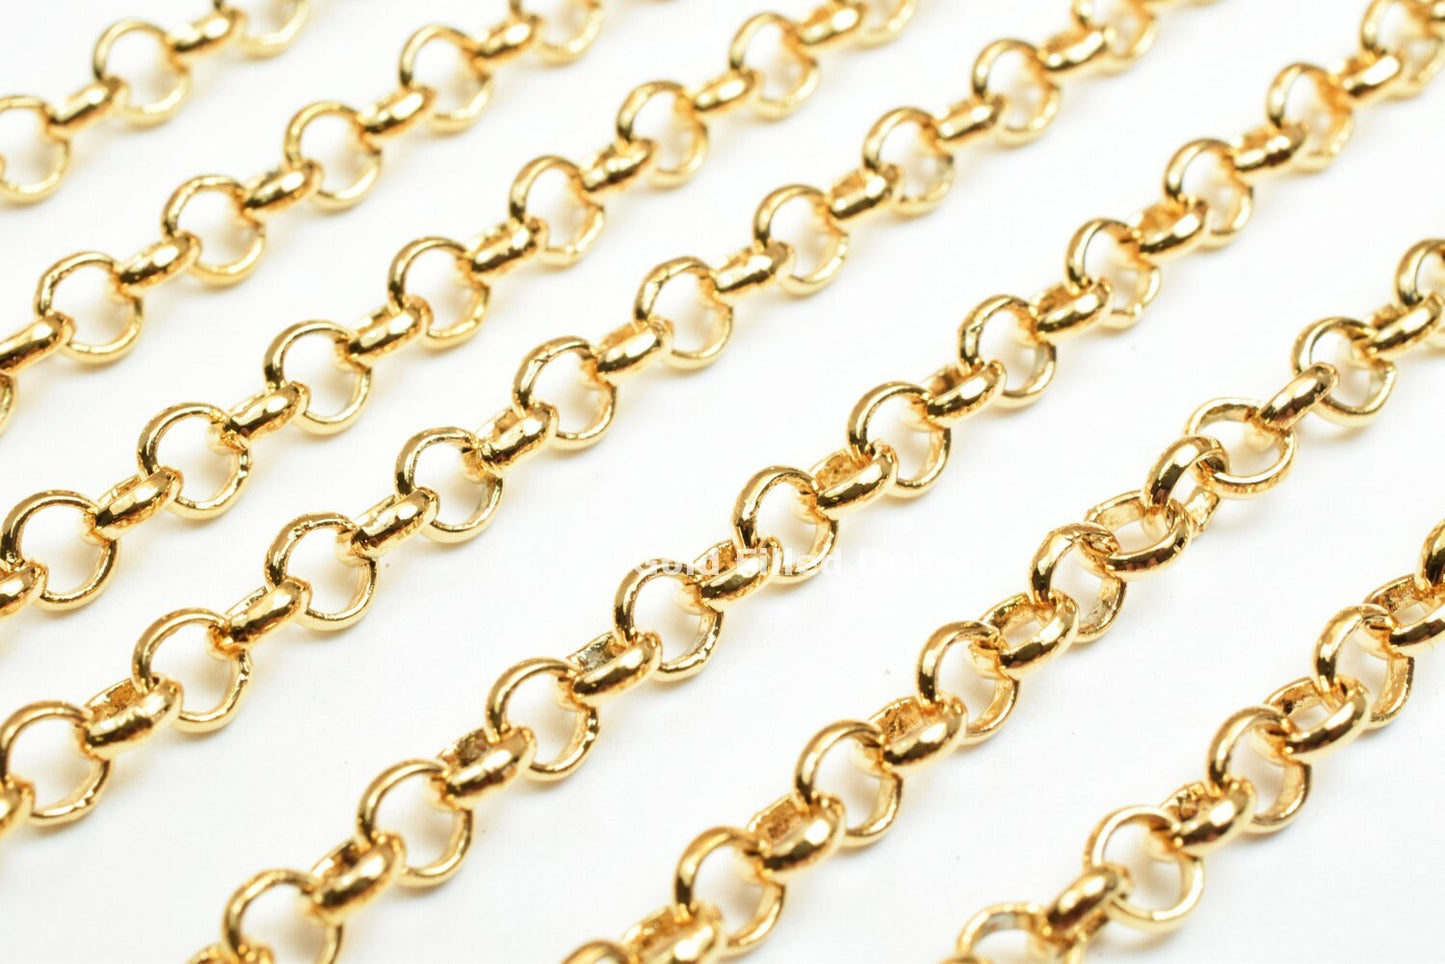 18K Gold Filled Rolo Cable Link Chain personalize necklace 3 feet Width 3.5mm Thickness 1mm findings for Jewelry Supplies GFC007 wholesale